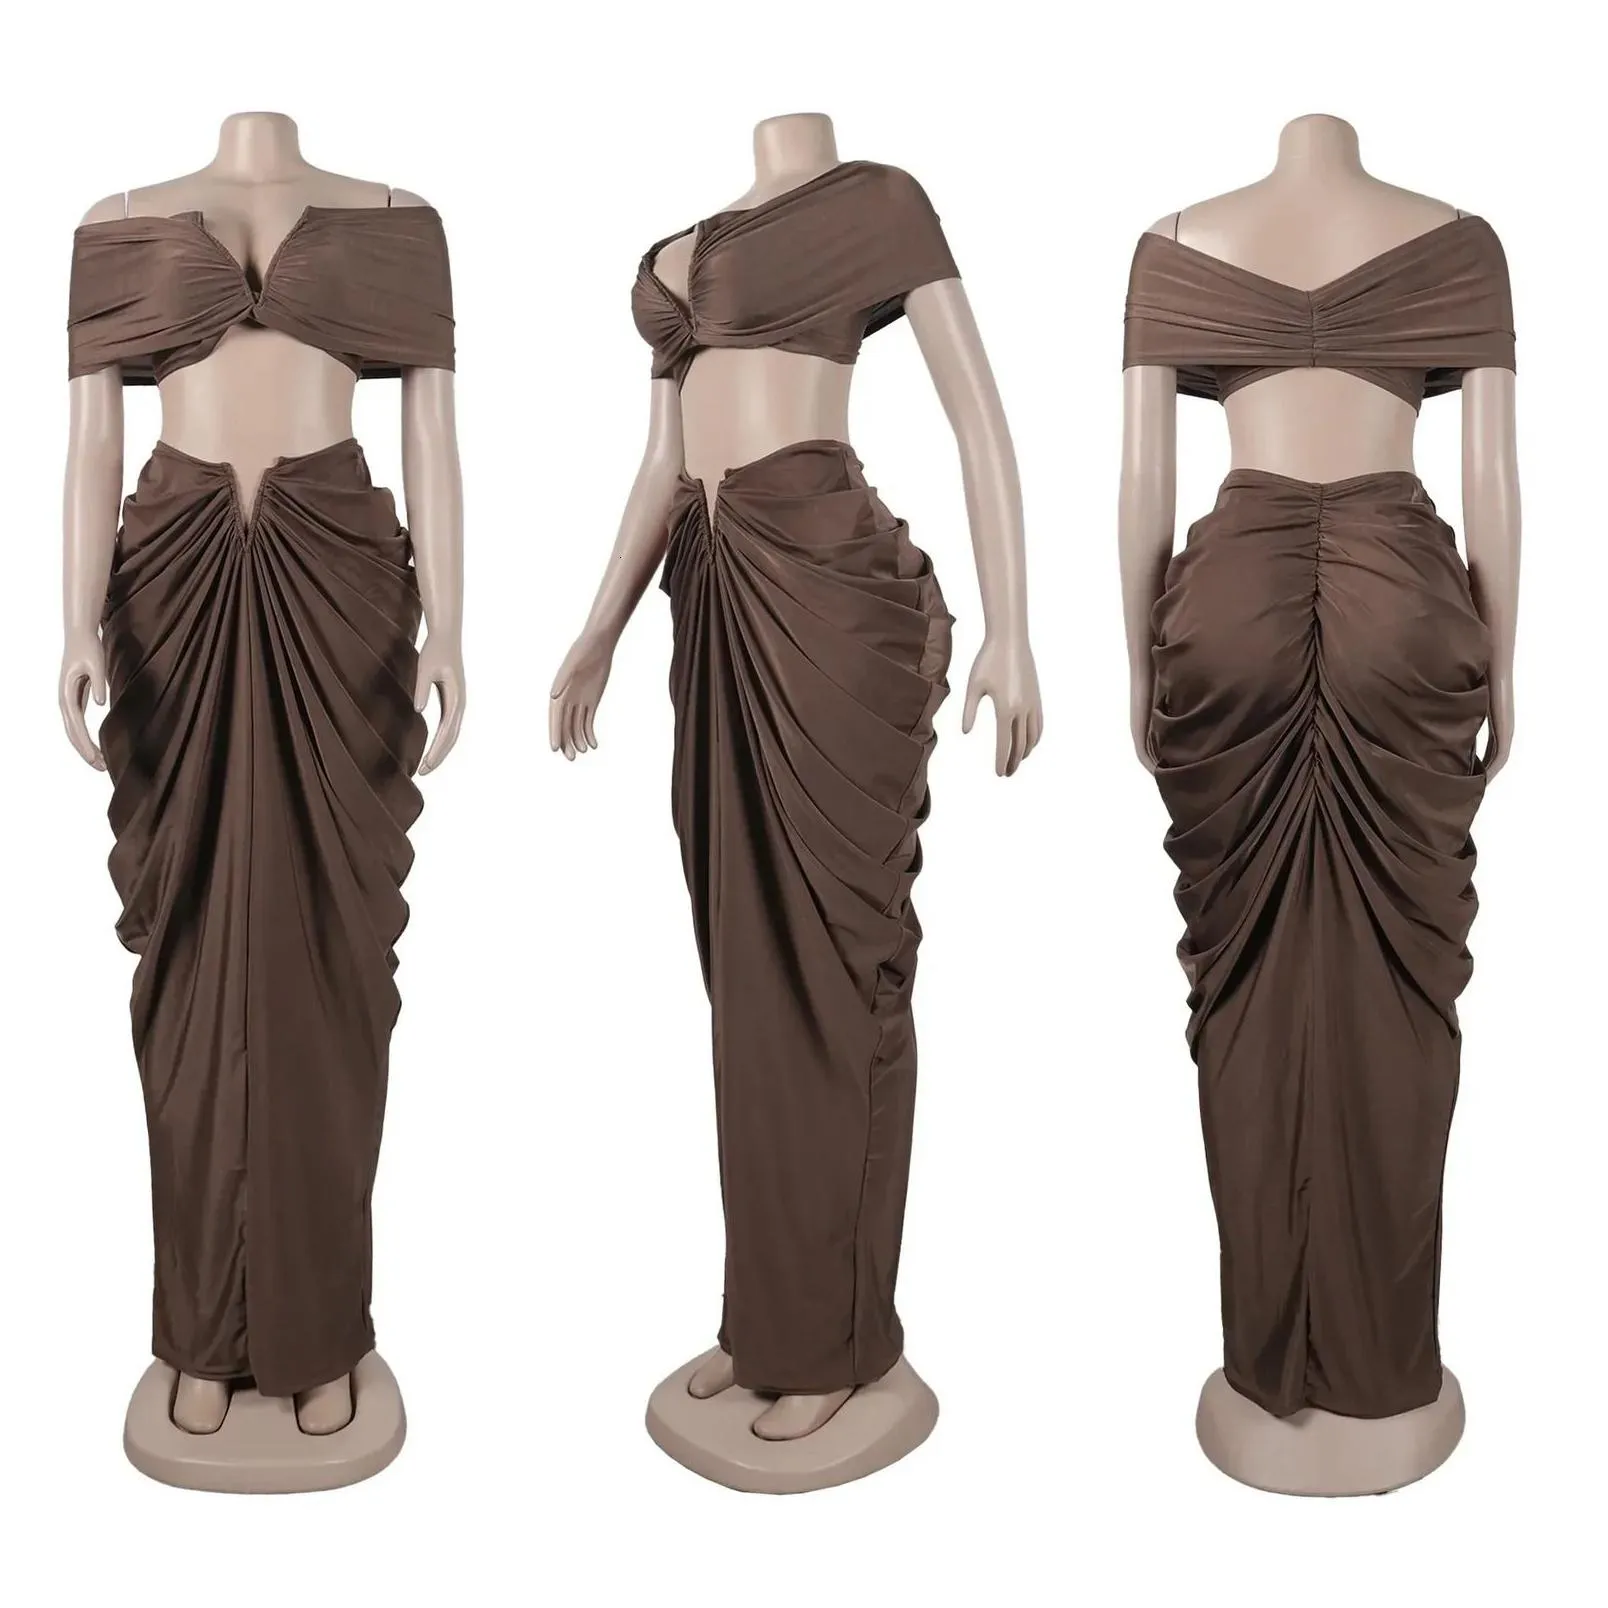 Two Piece Dress Cm.Yaya Stacked Ruched Womens Set Off Shoder Crop Top And Low Waist Maxi Long Skirts Y Party 2 Sets Outfits 240220 Dr Dhthc